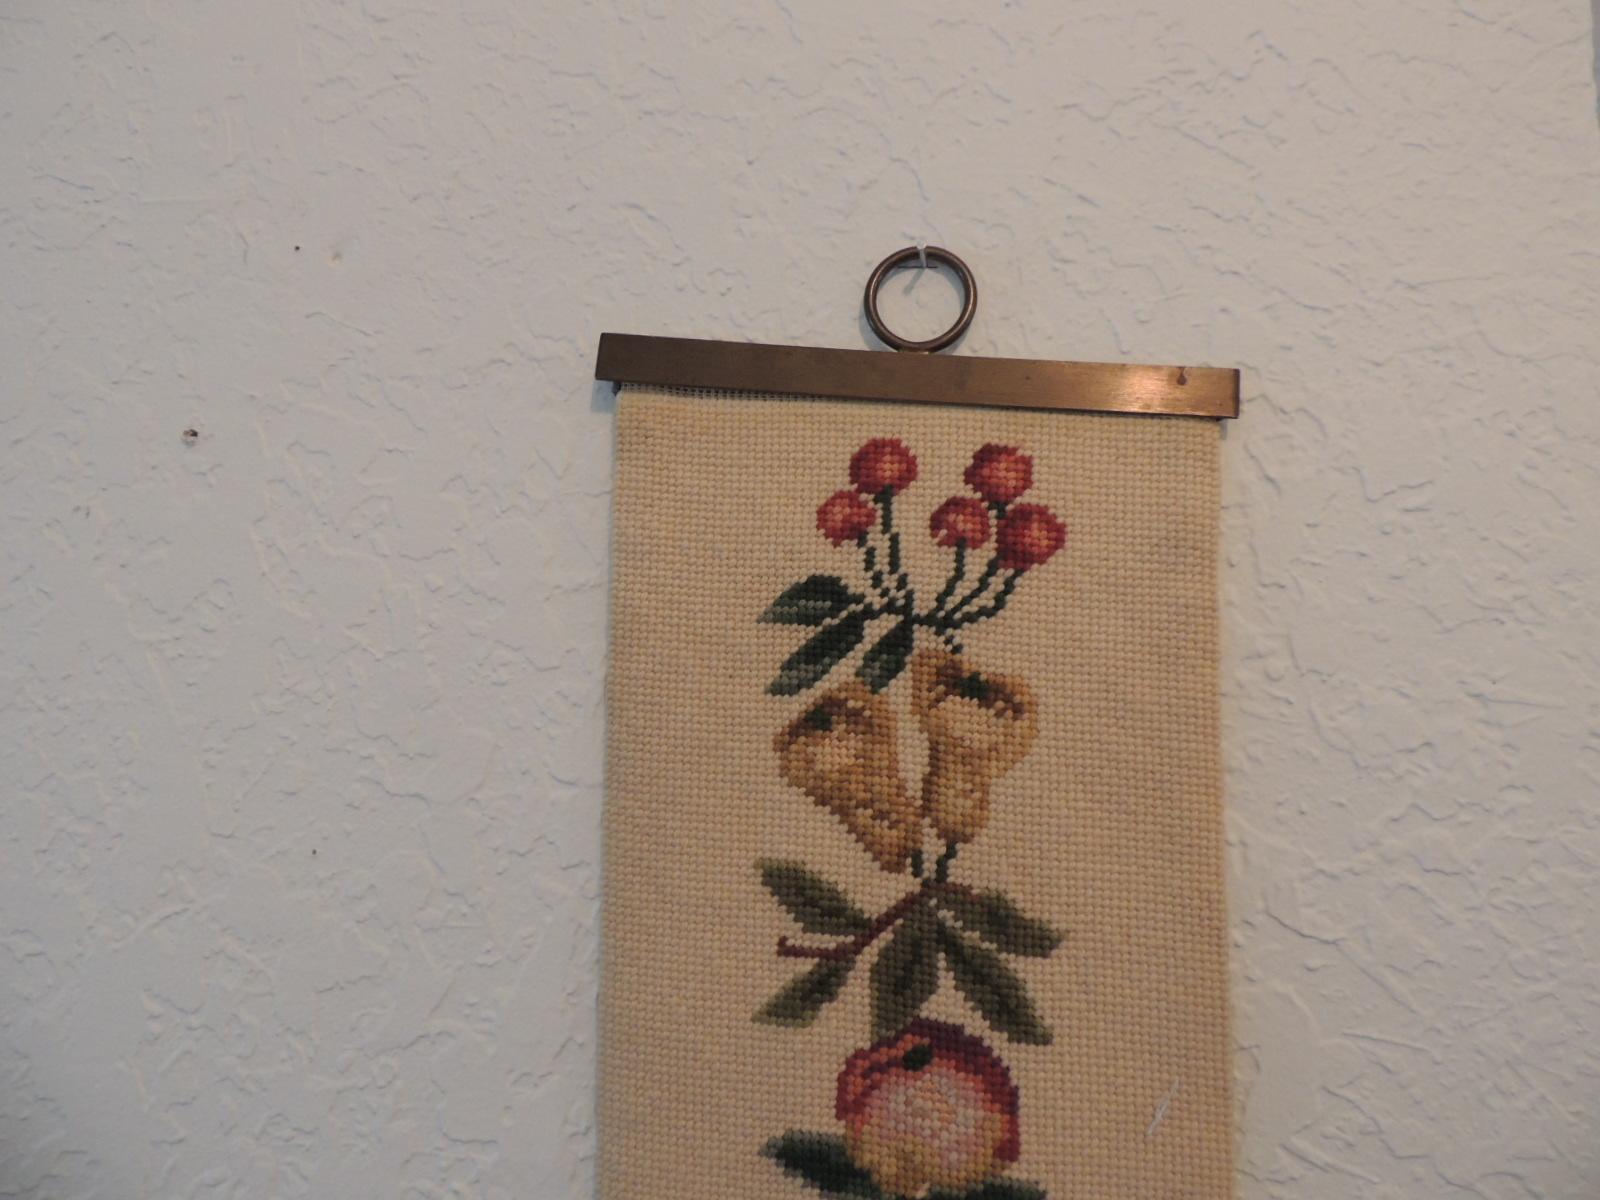 Vintage Victorian style tapestry bell pull with brass fitting.
Depicting flowers and fruits.
Size: 7